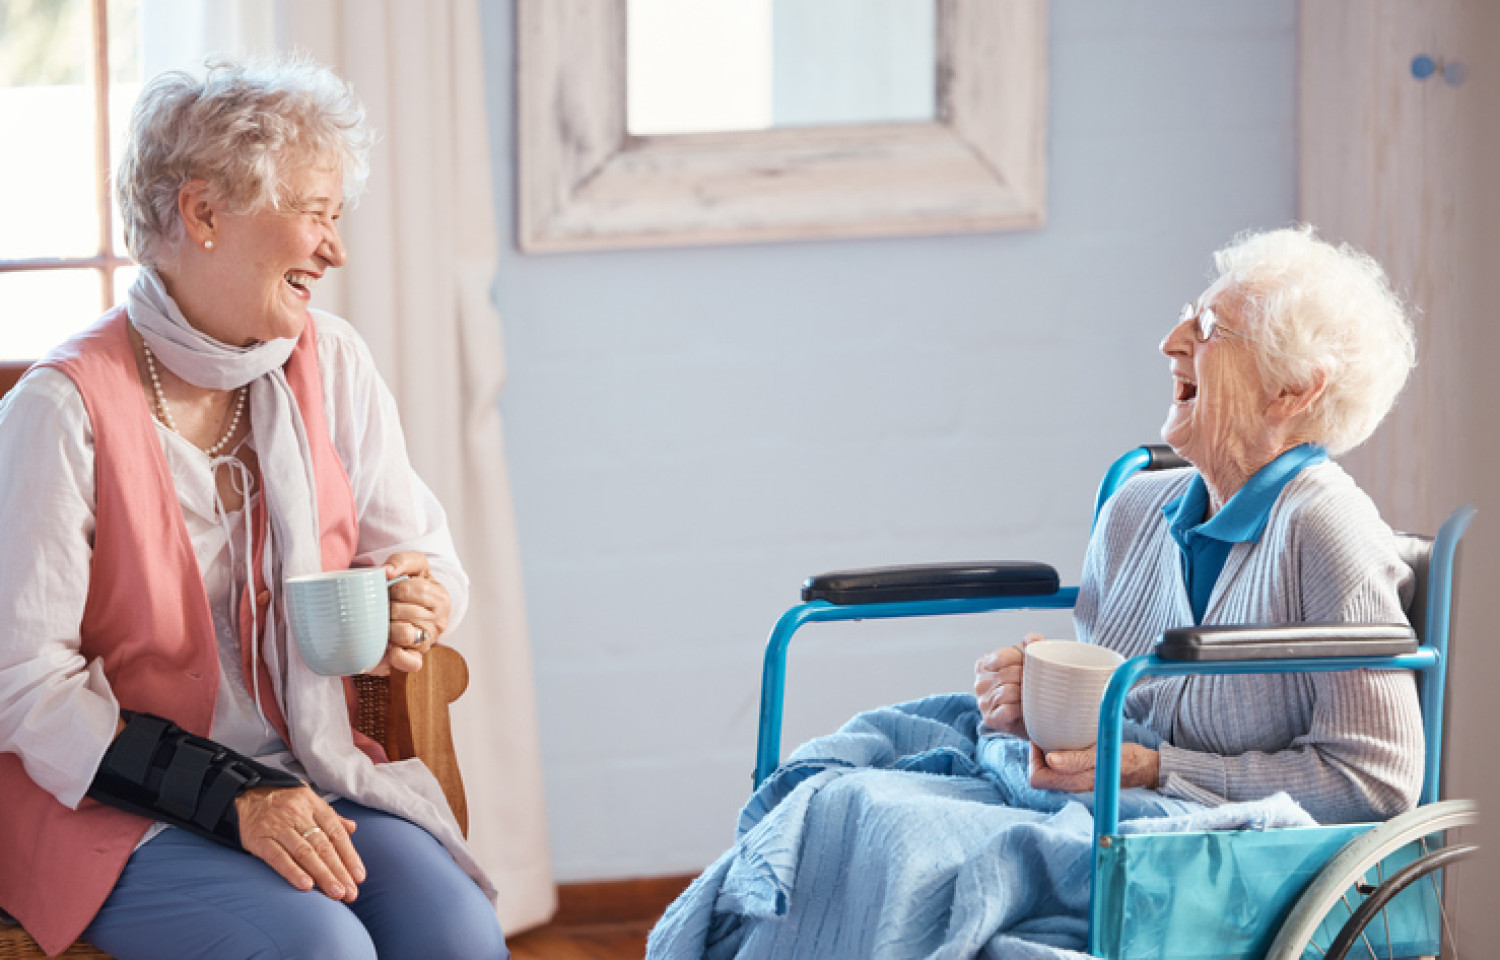 A conversation between two senior ladies, one in a wheelchair, showcasing the supportive community aspect of independent living arrangements facilitated by the NDIS.